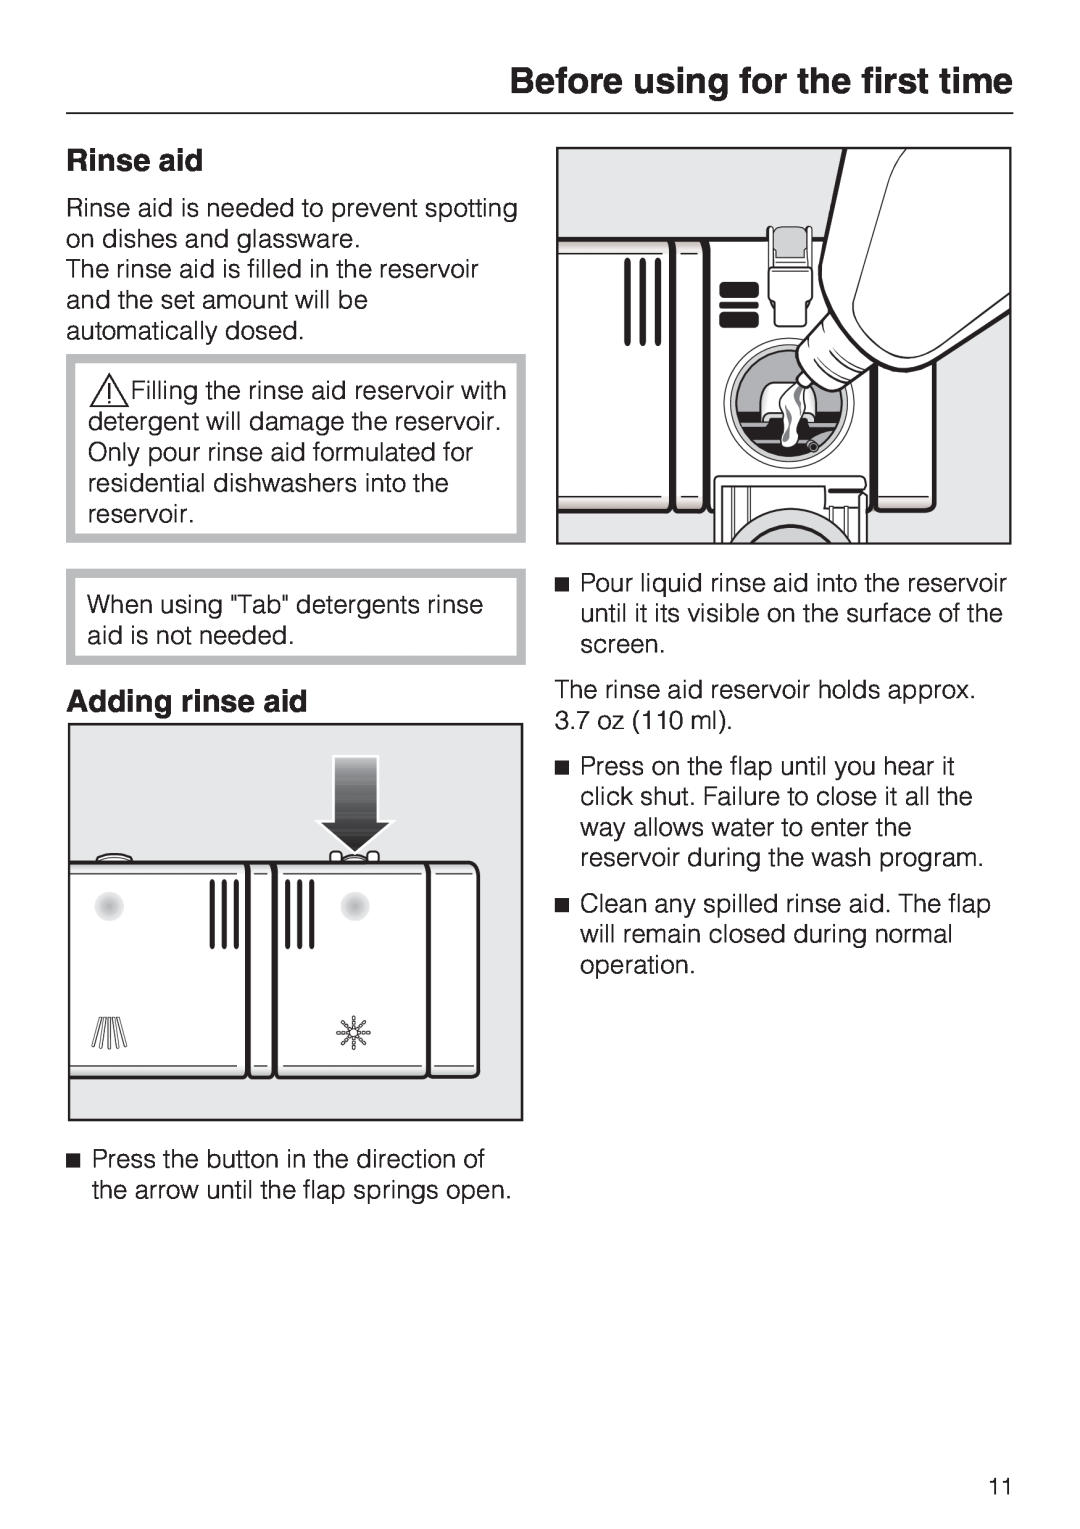 Miele G2142 operating instructions Rinse aid, Adding rinse aid, Before using for the first time 